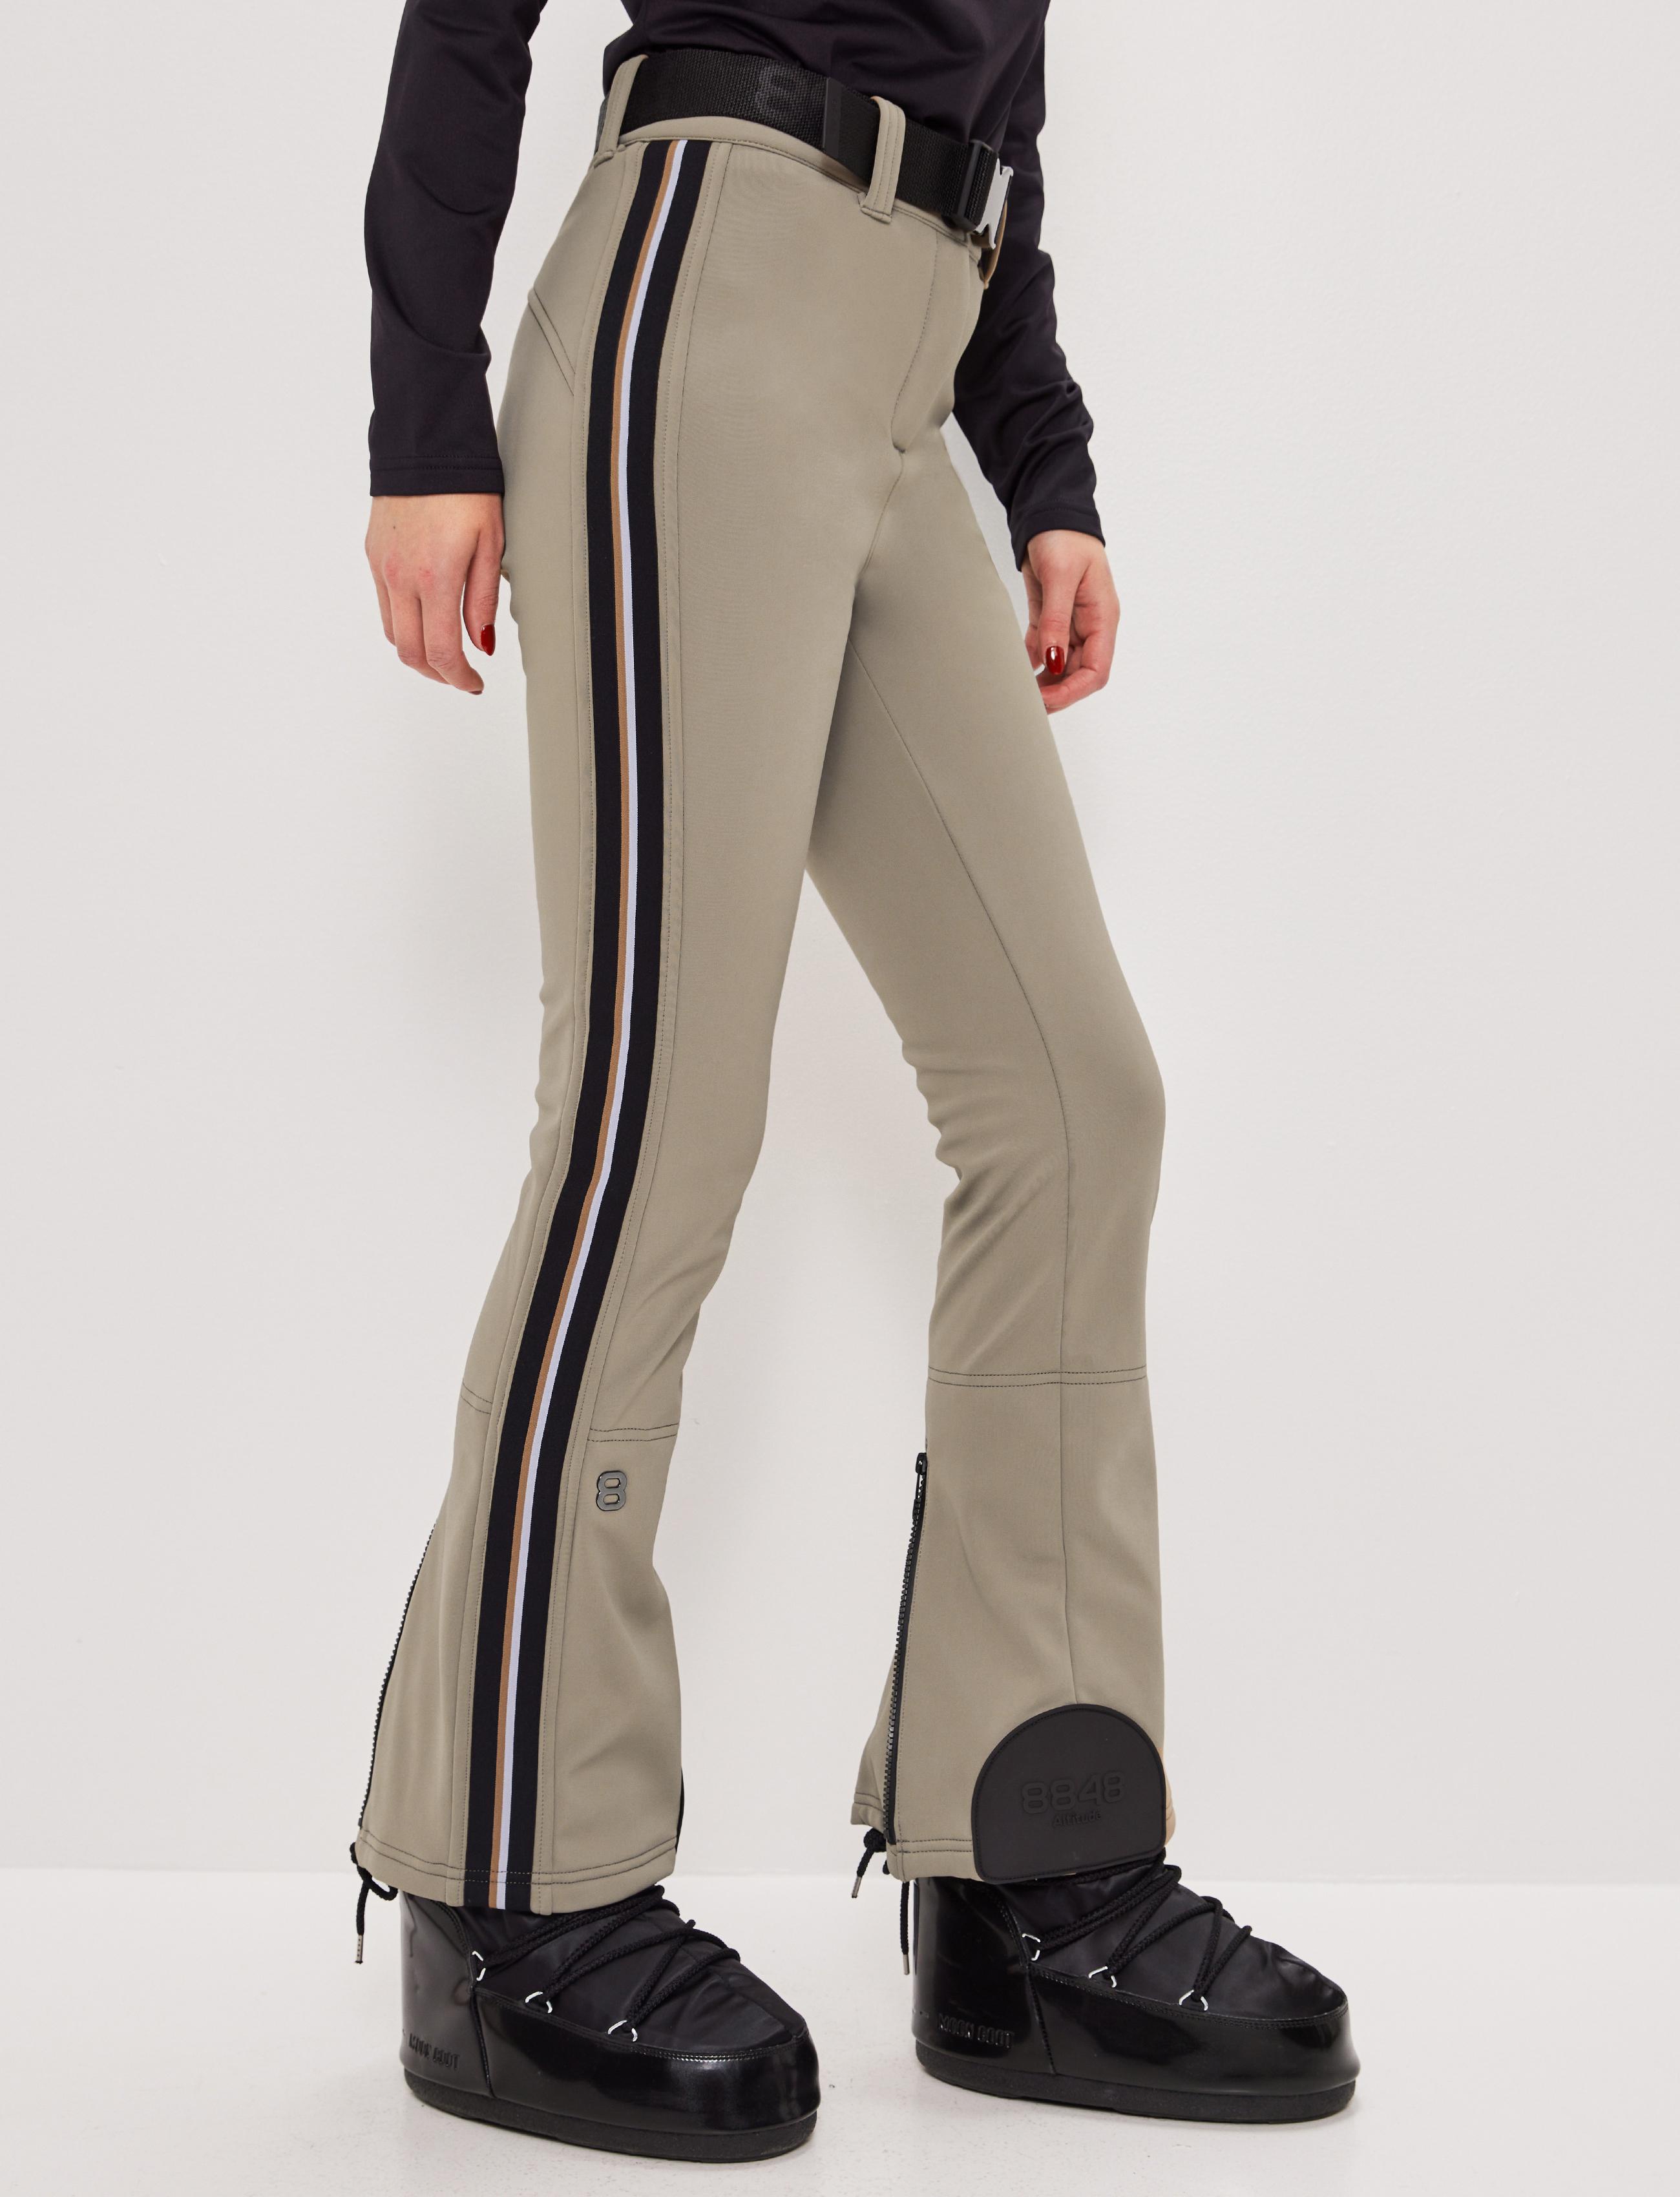 Mens Ski Pants  Trousers  4F Sportswear and shoes